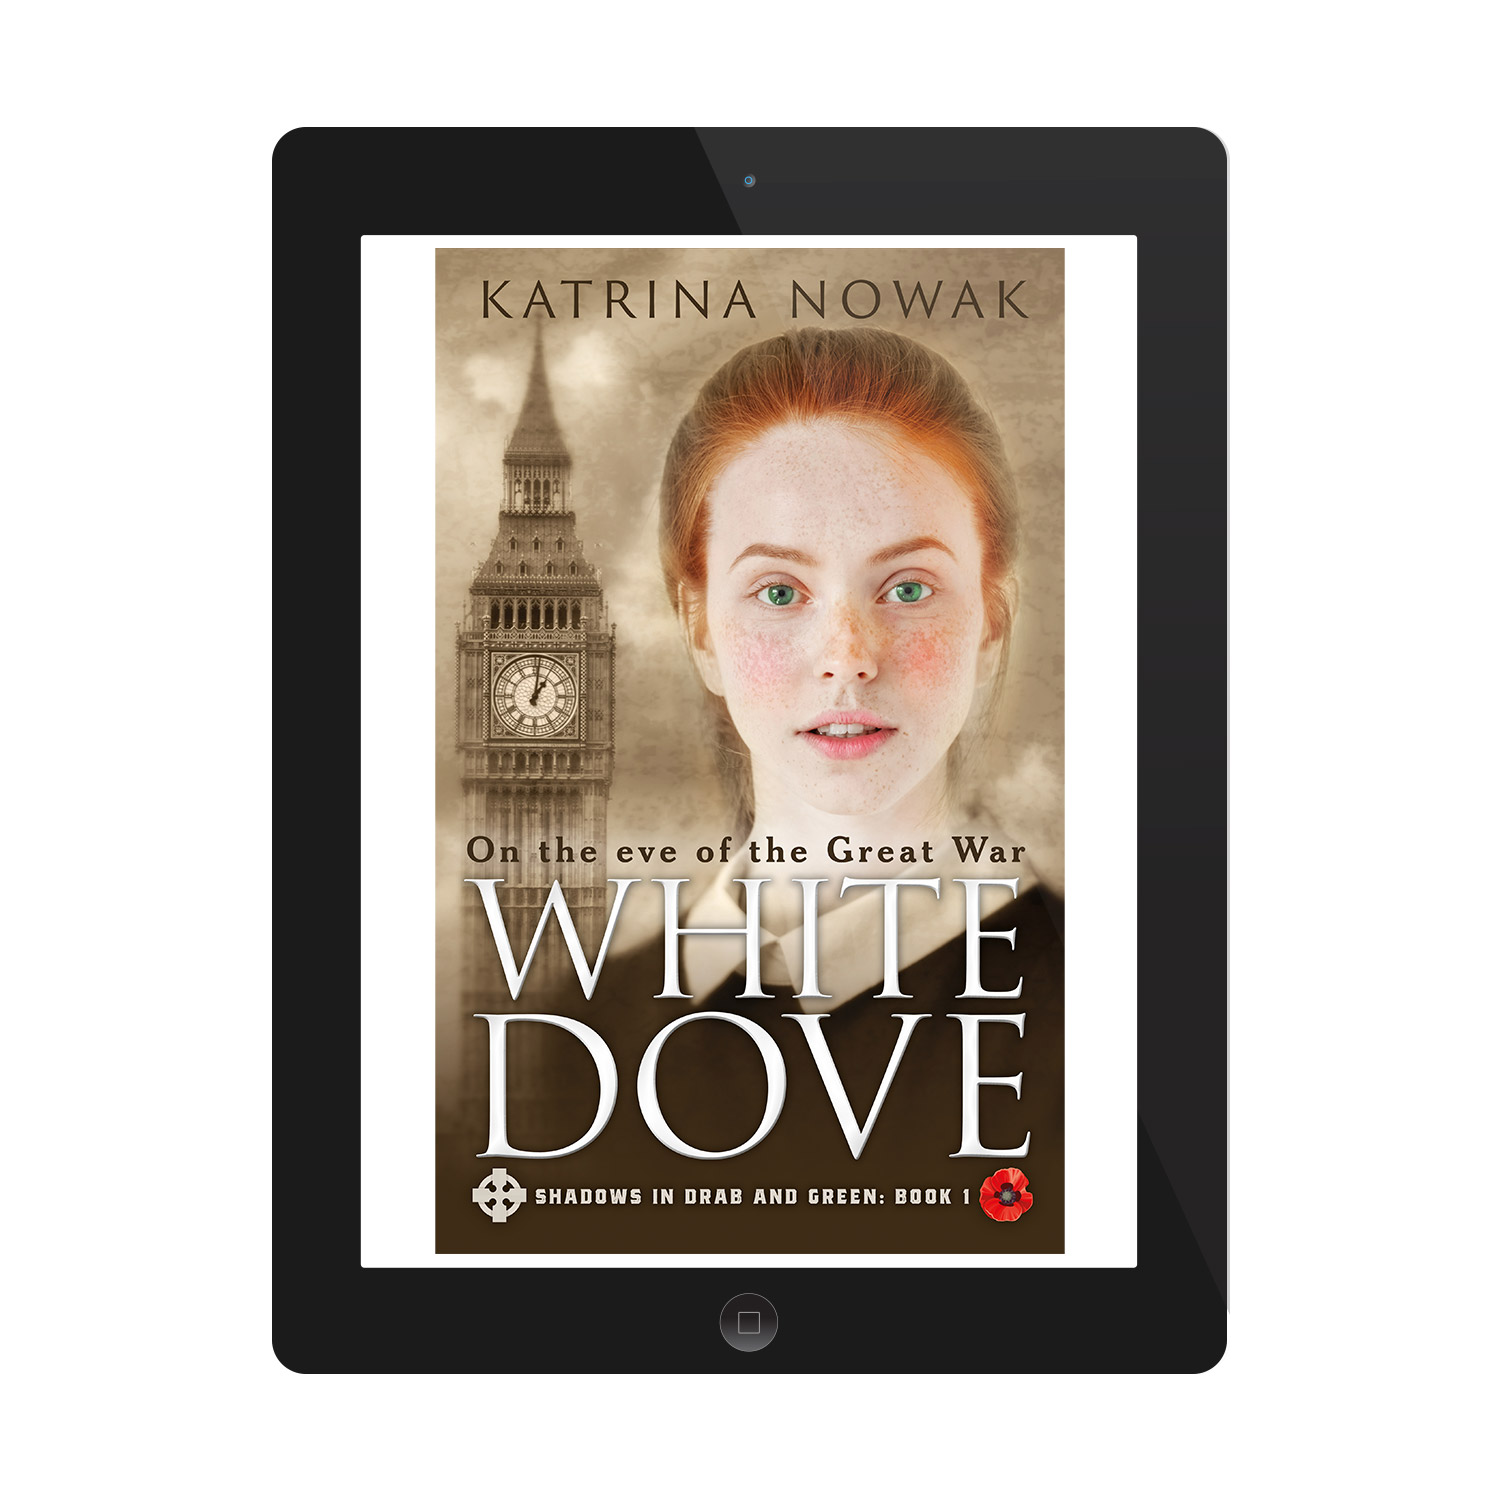 'White Dove' is a sweeping historical novel, set on the eve of WW1, by Katrina Nowak. The book cover and interior were designed by Mark Thomas, of coverness.com. To find out more about my book design services, please visit www.coverness.com.